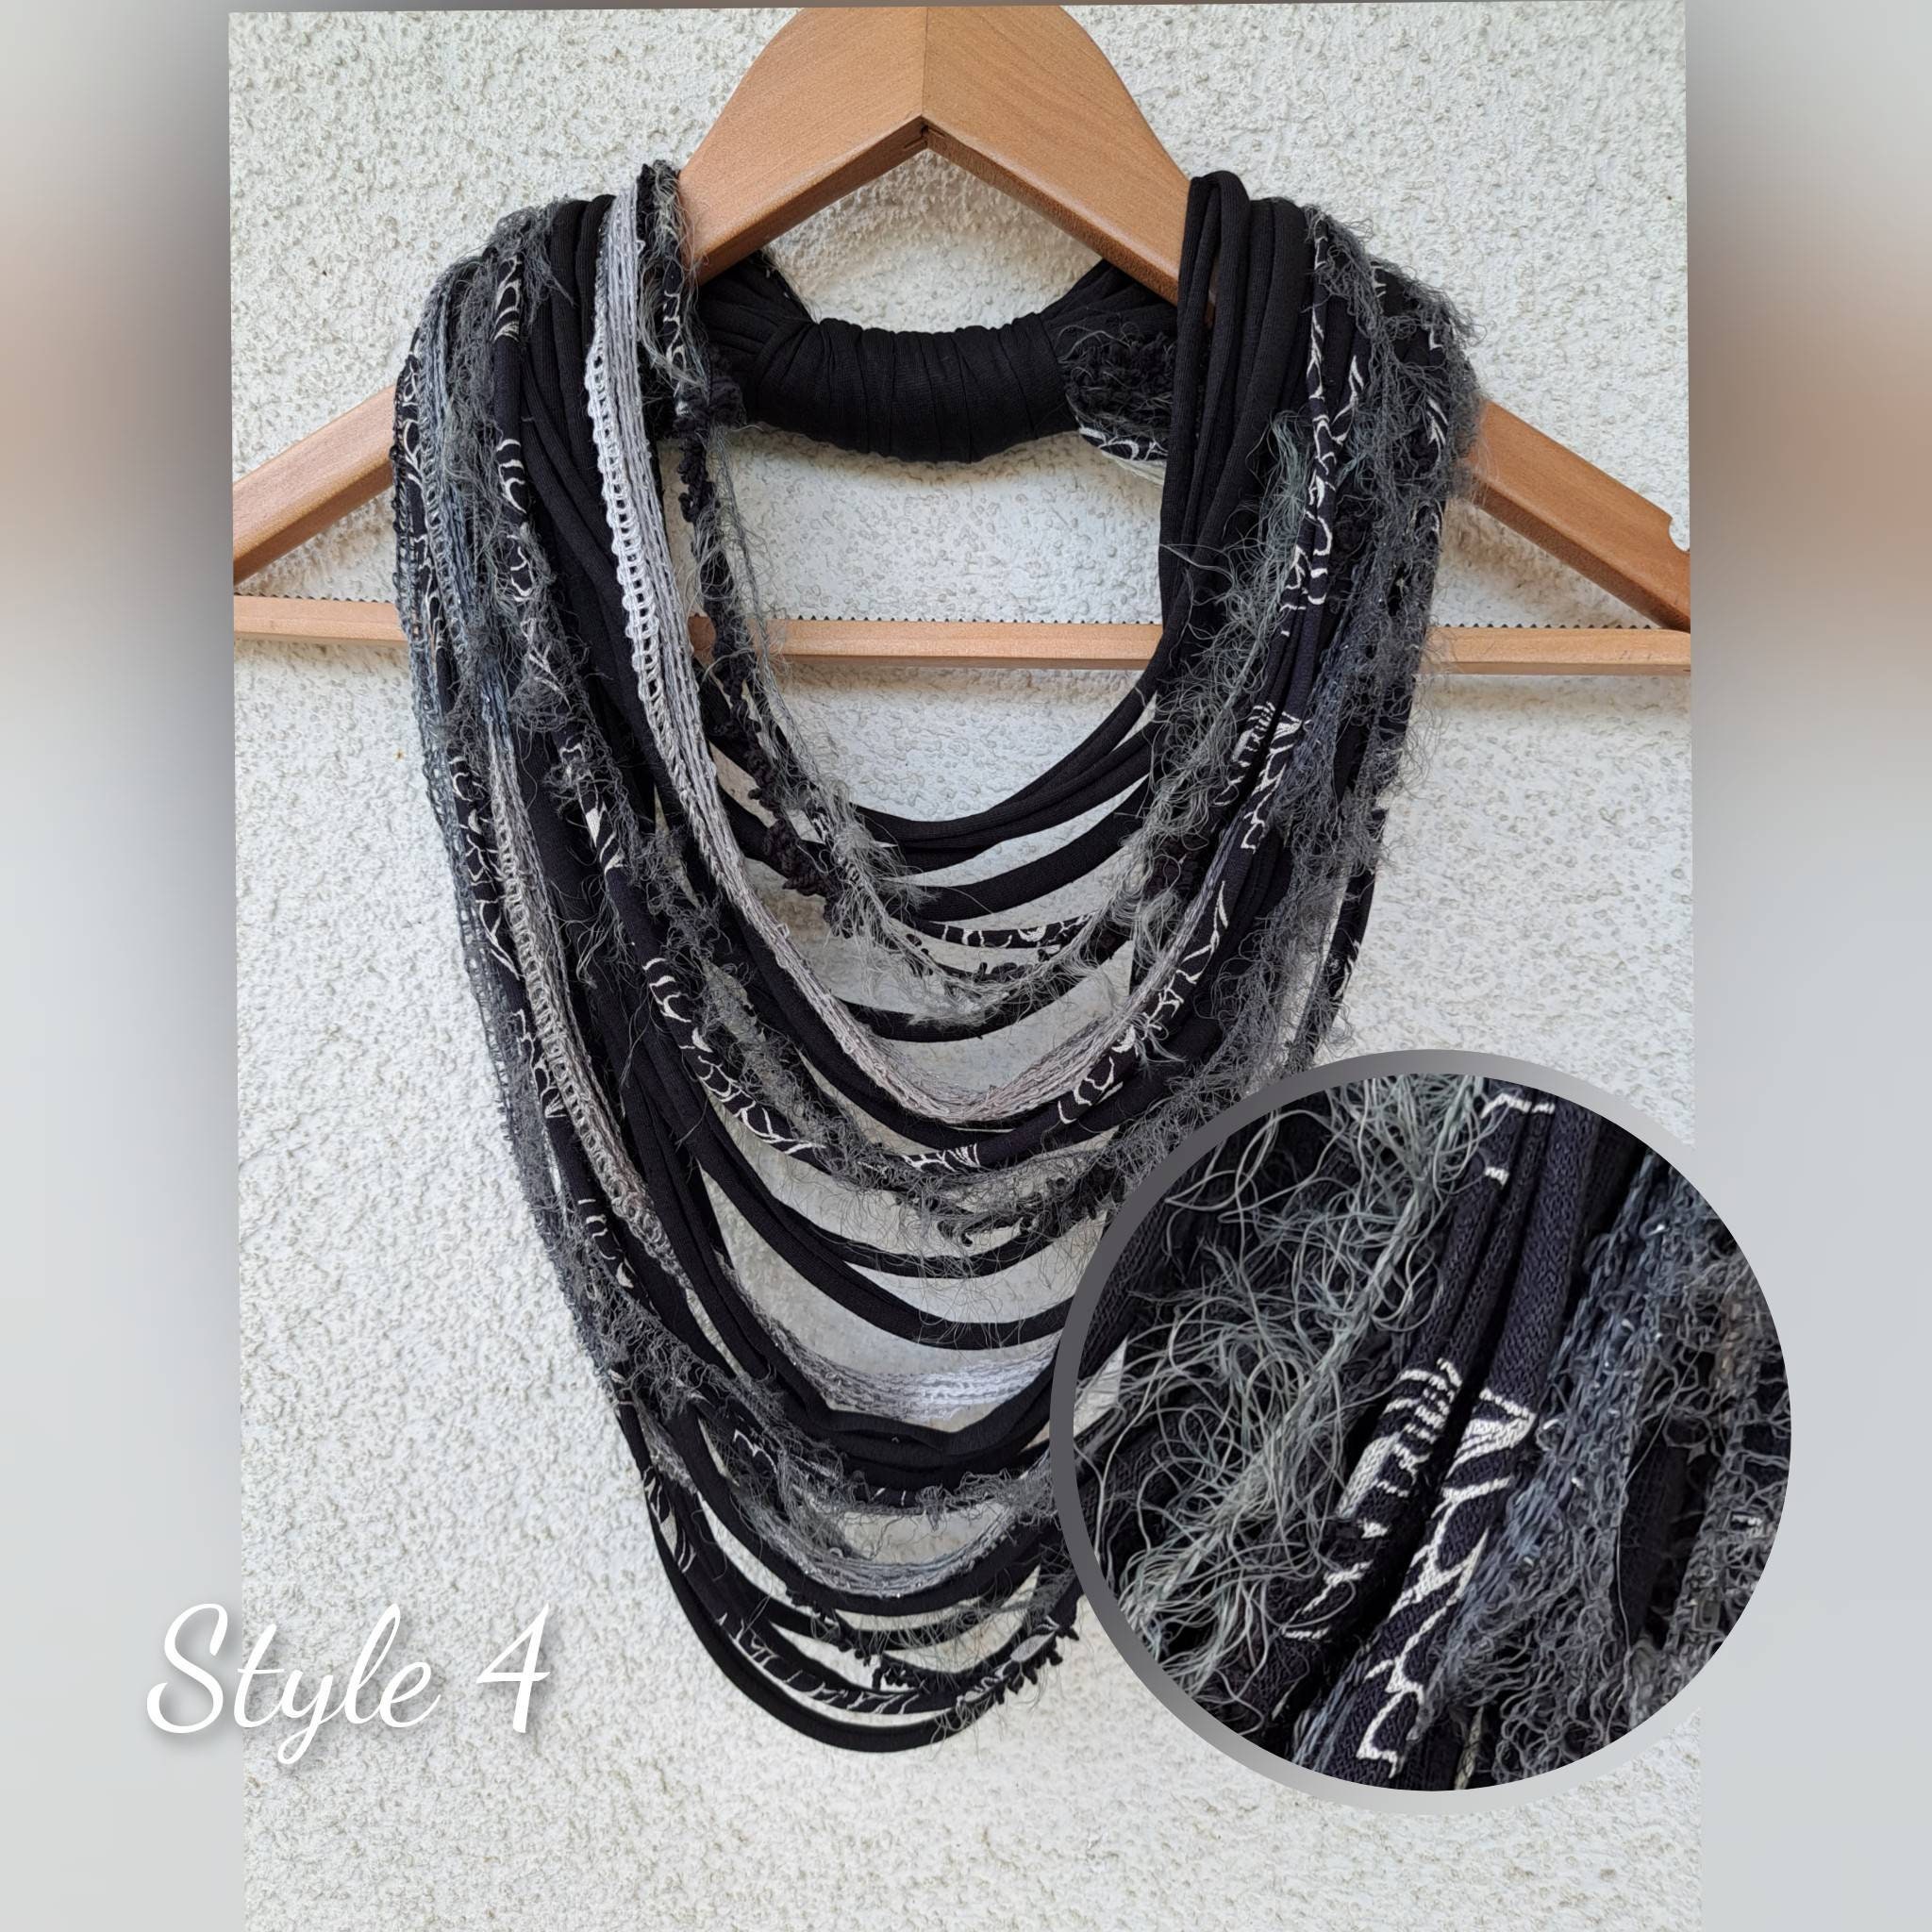 Everyday Jewelry Grey and Multicolored Cotton Scarf Necklace Jewelrys - Scarf Necklace, Cotton / Polyester / Acrylic Pearl / Silver-Colored Plastic, M